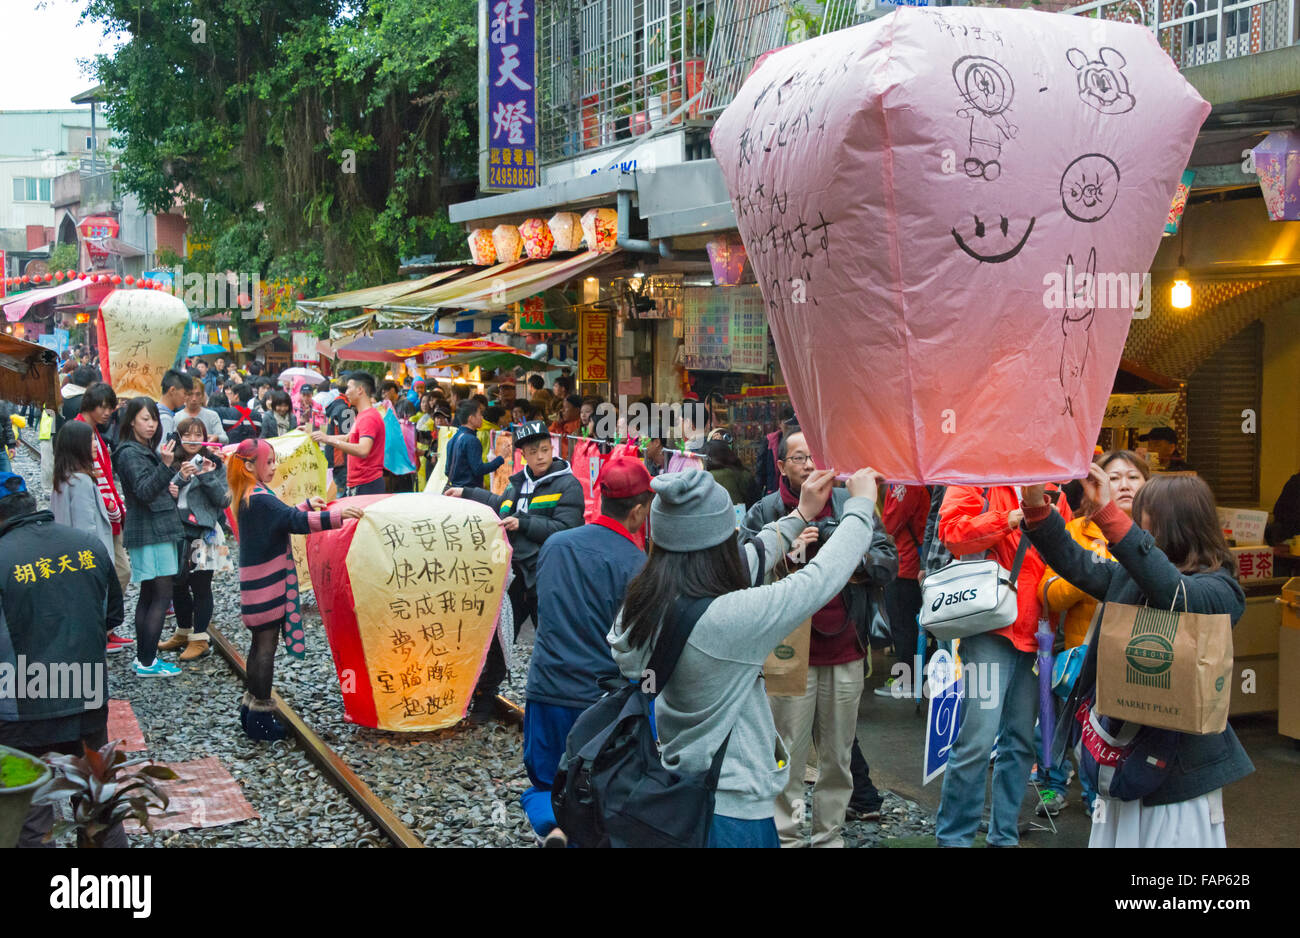 Releasing Sky Lantern written with good wishes during Chinese Lantern Festival, Shifen Old Street, Taiwan Stock Photo